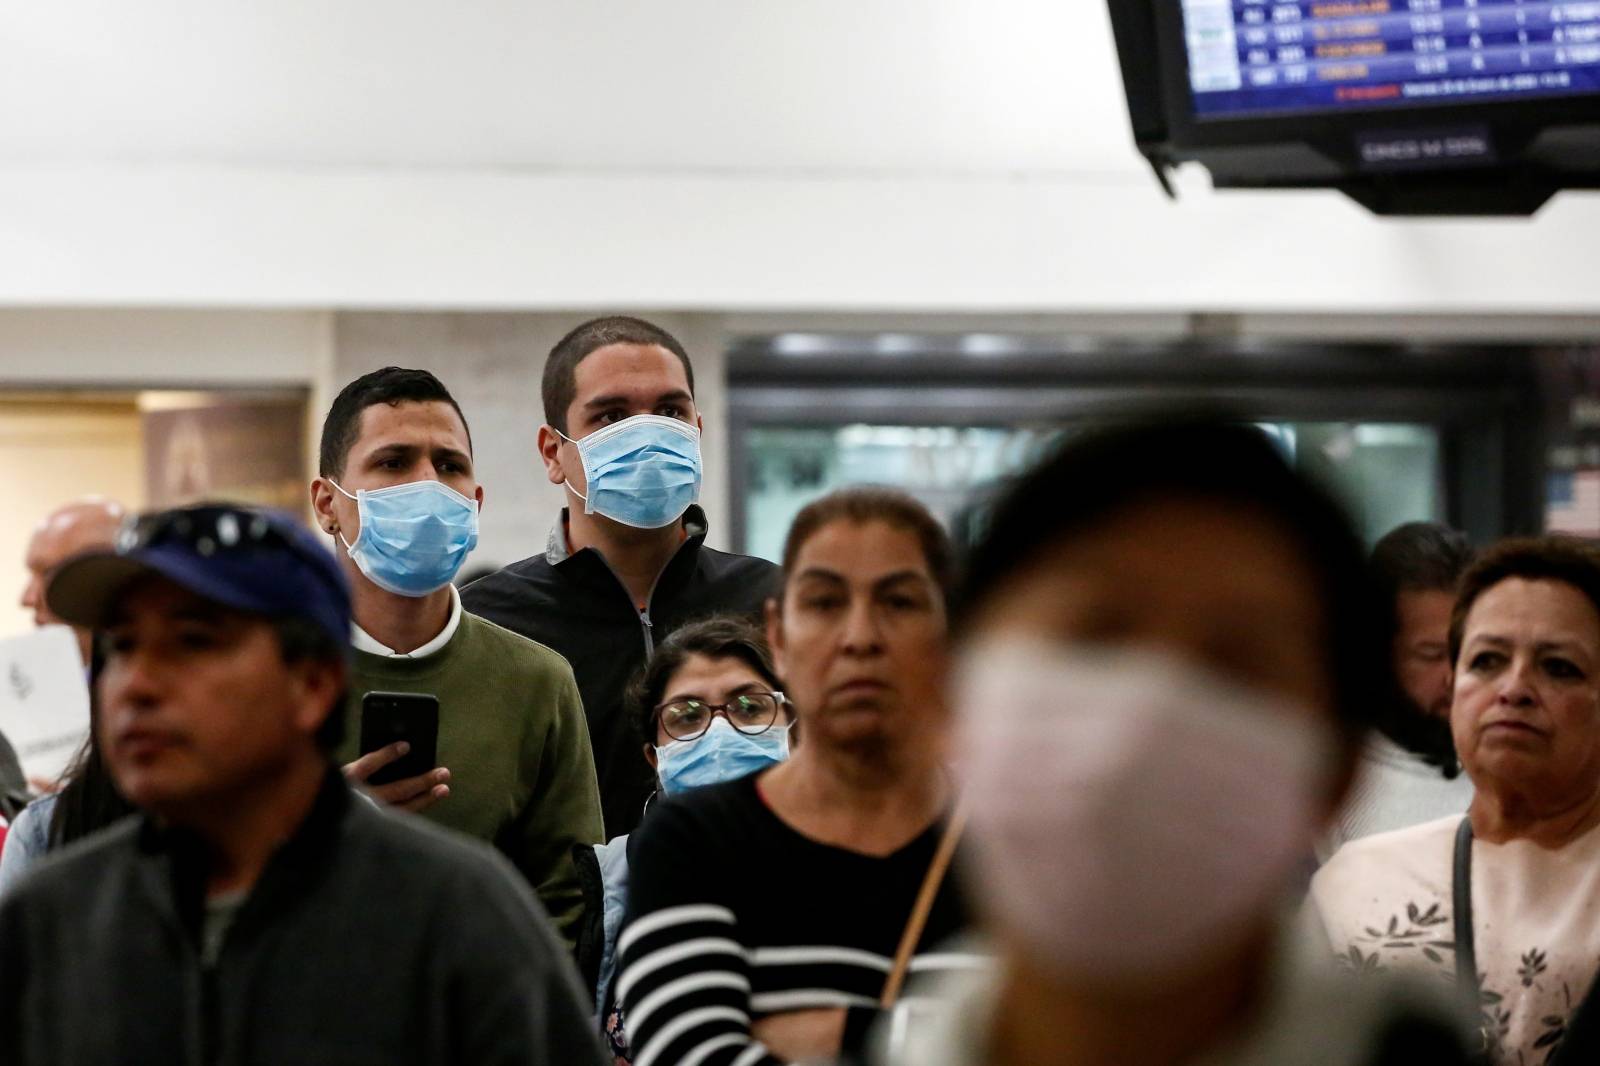 Raphael Hidalgo and his friends wear surgical mask as a preventive measure in light of the coronavirus outbreak in China, at Benito Juarez international airport in Mexico City